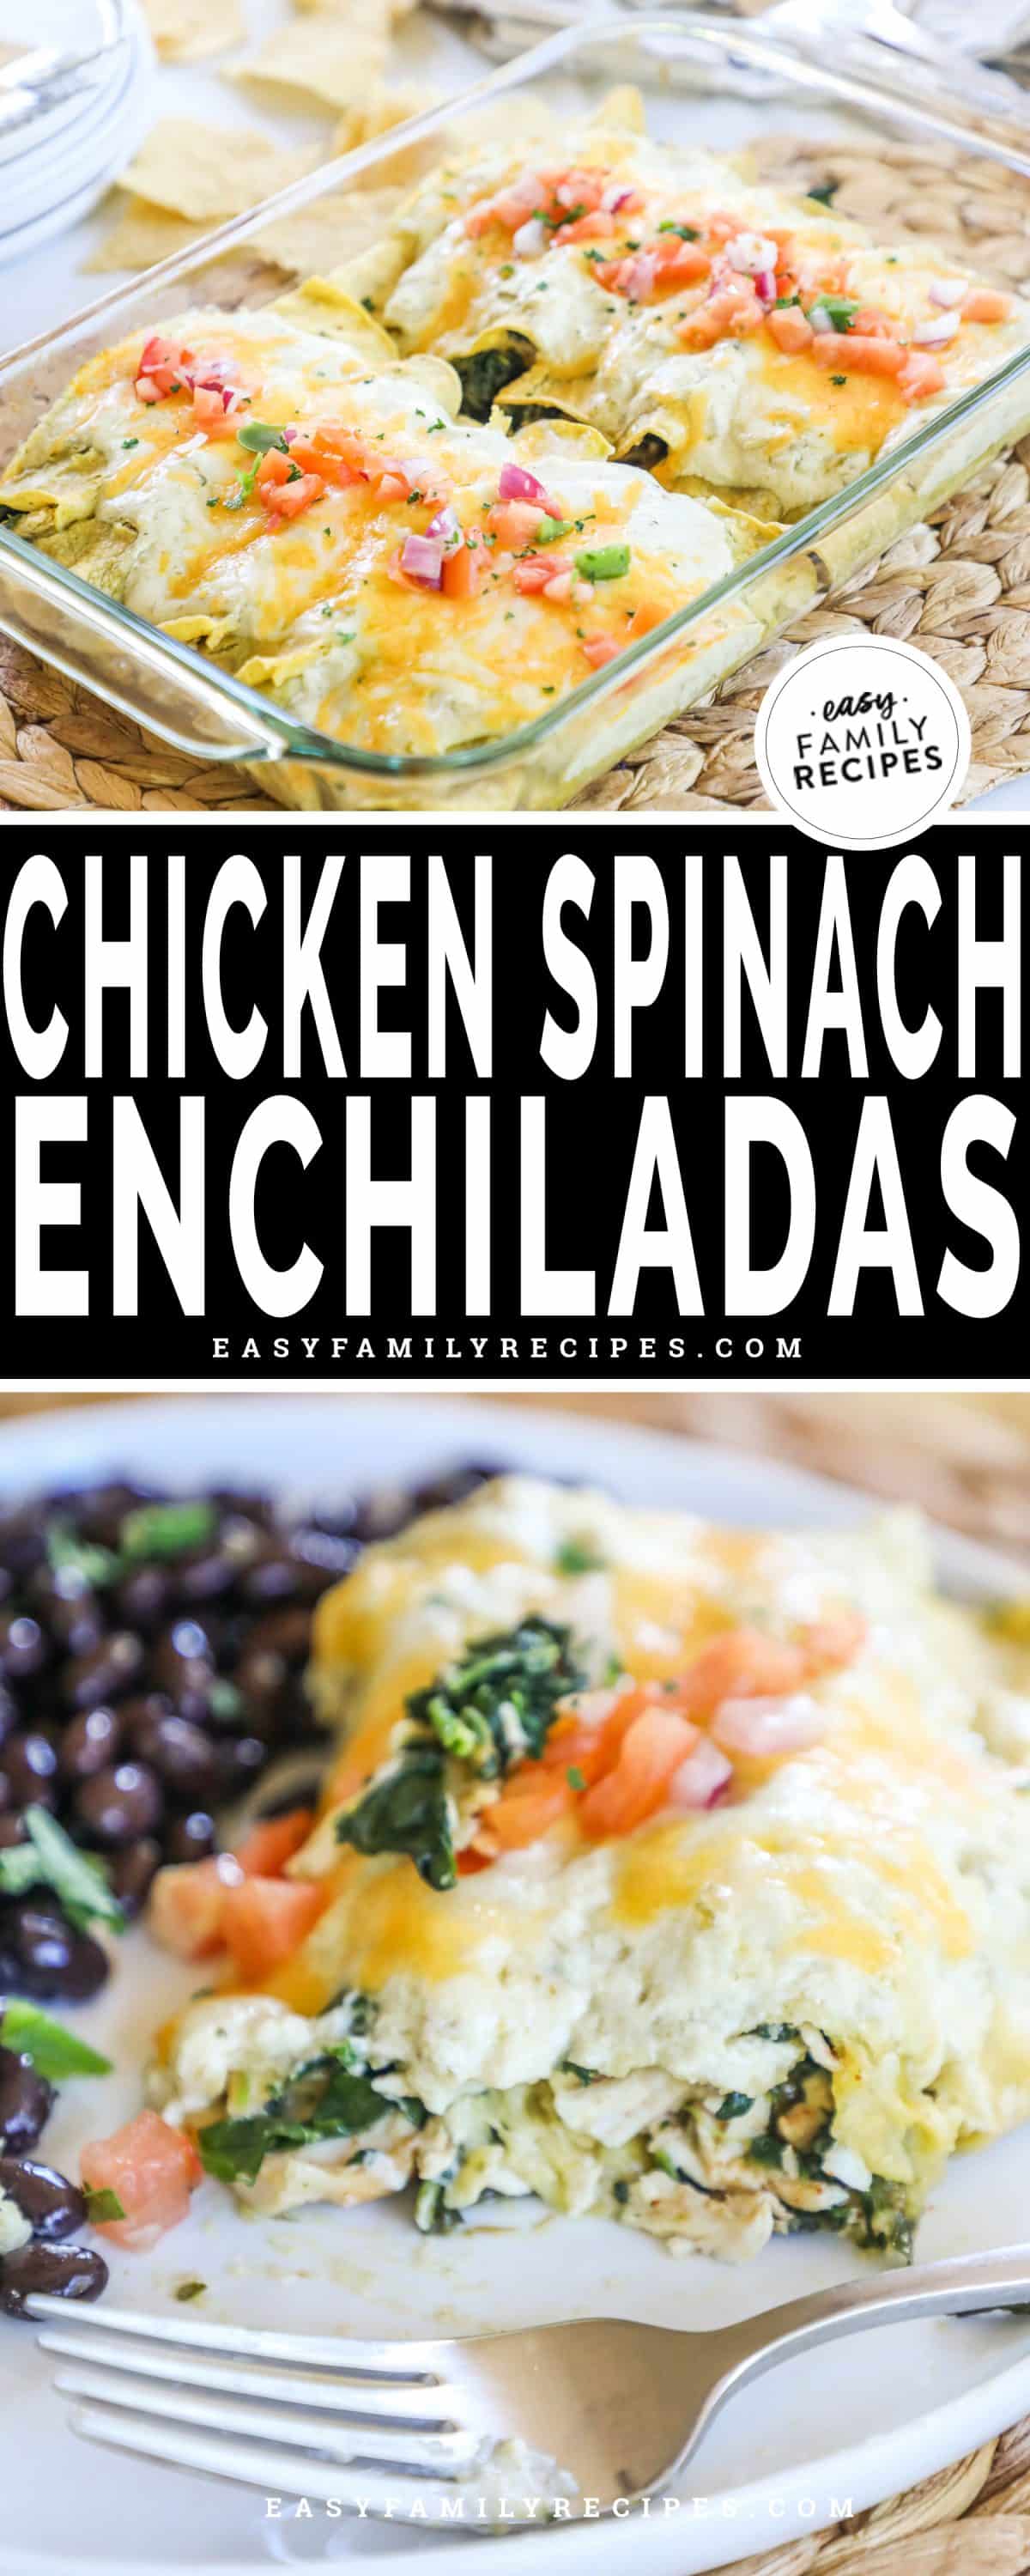 Creamy enchiladas in a pan with golden brown cheese and on a plate topped with salsa.